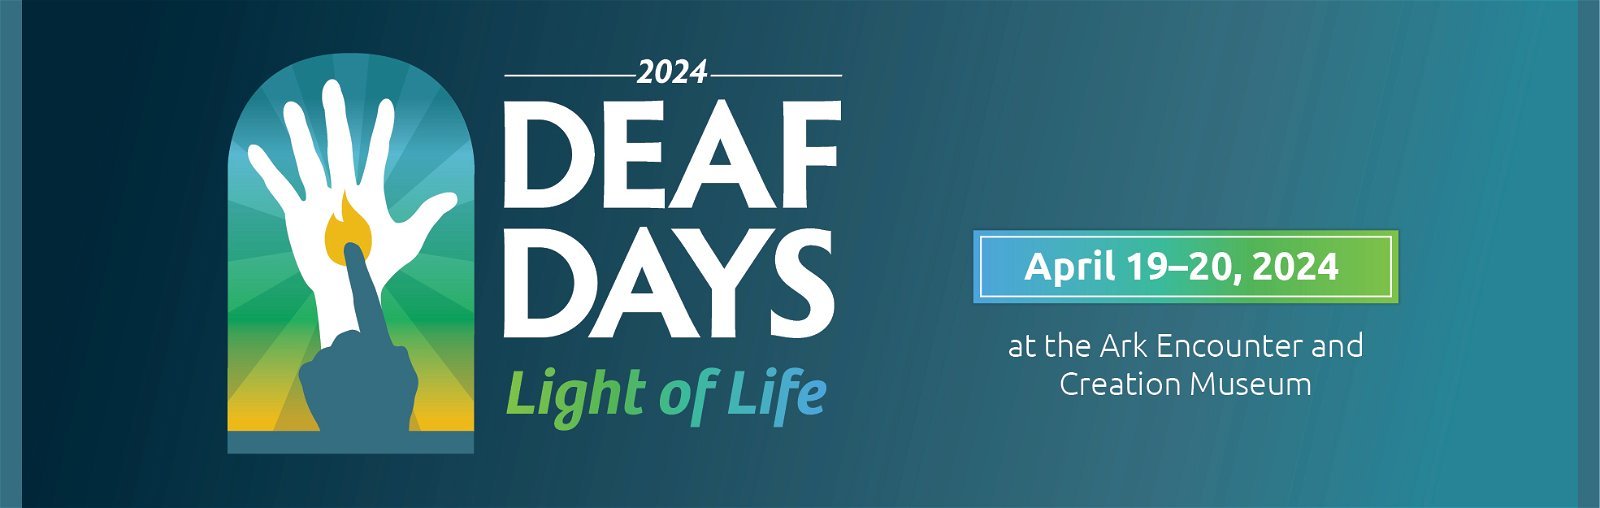 Deaf Days Returns with Special Event